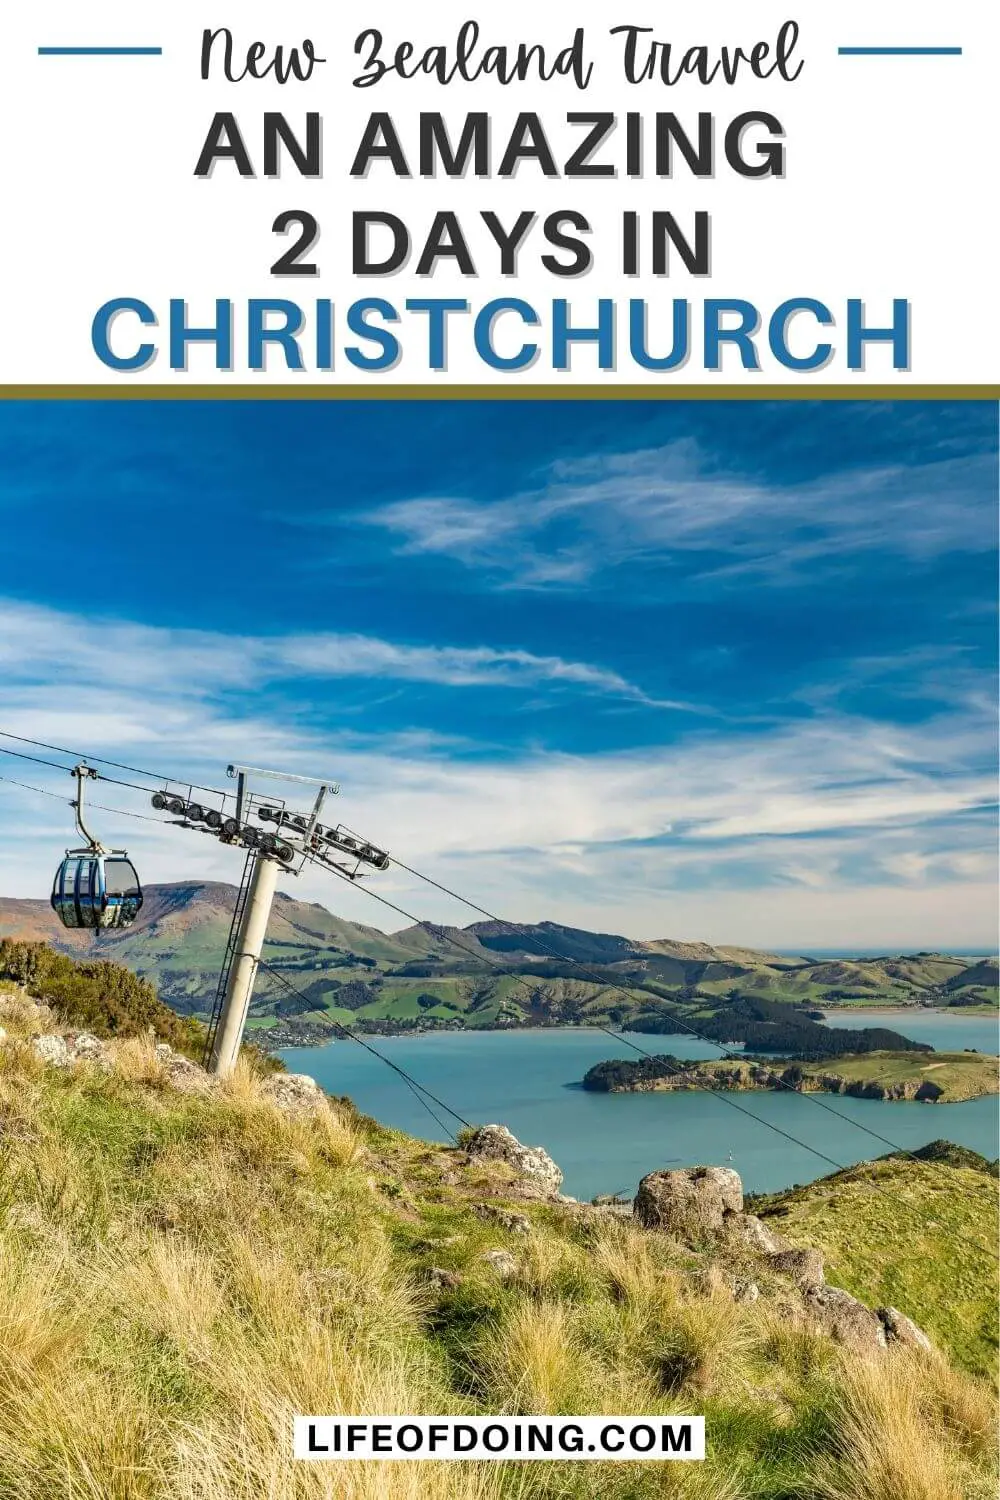 A cable car passing by a blue bay and grassy area in Christchurch, New Zealand